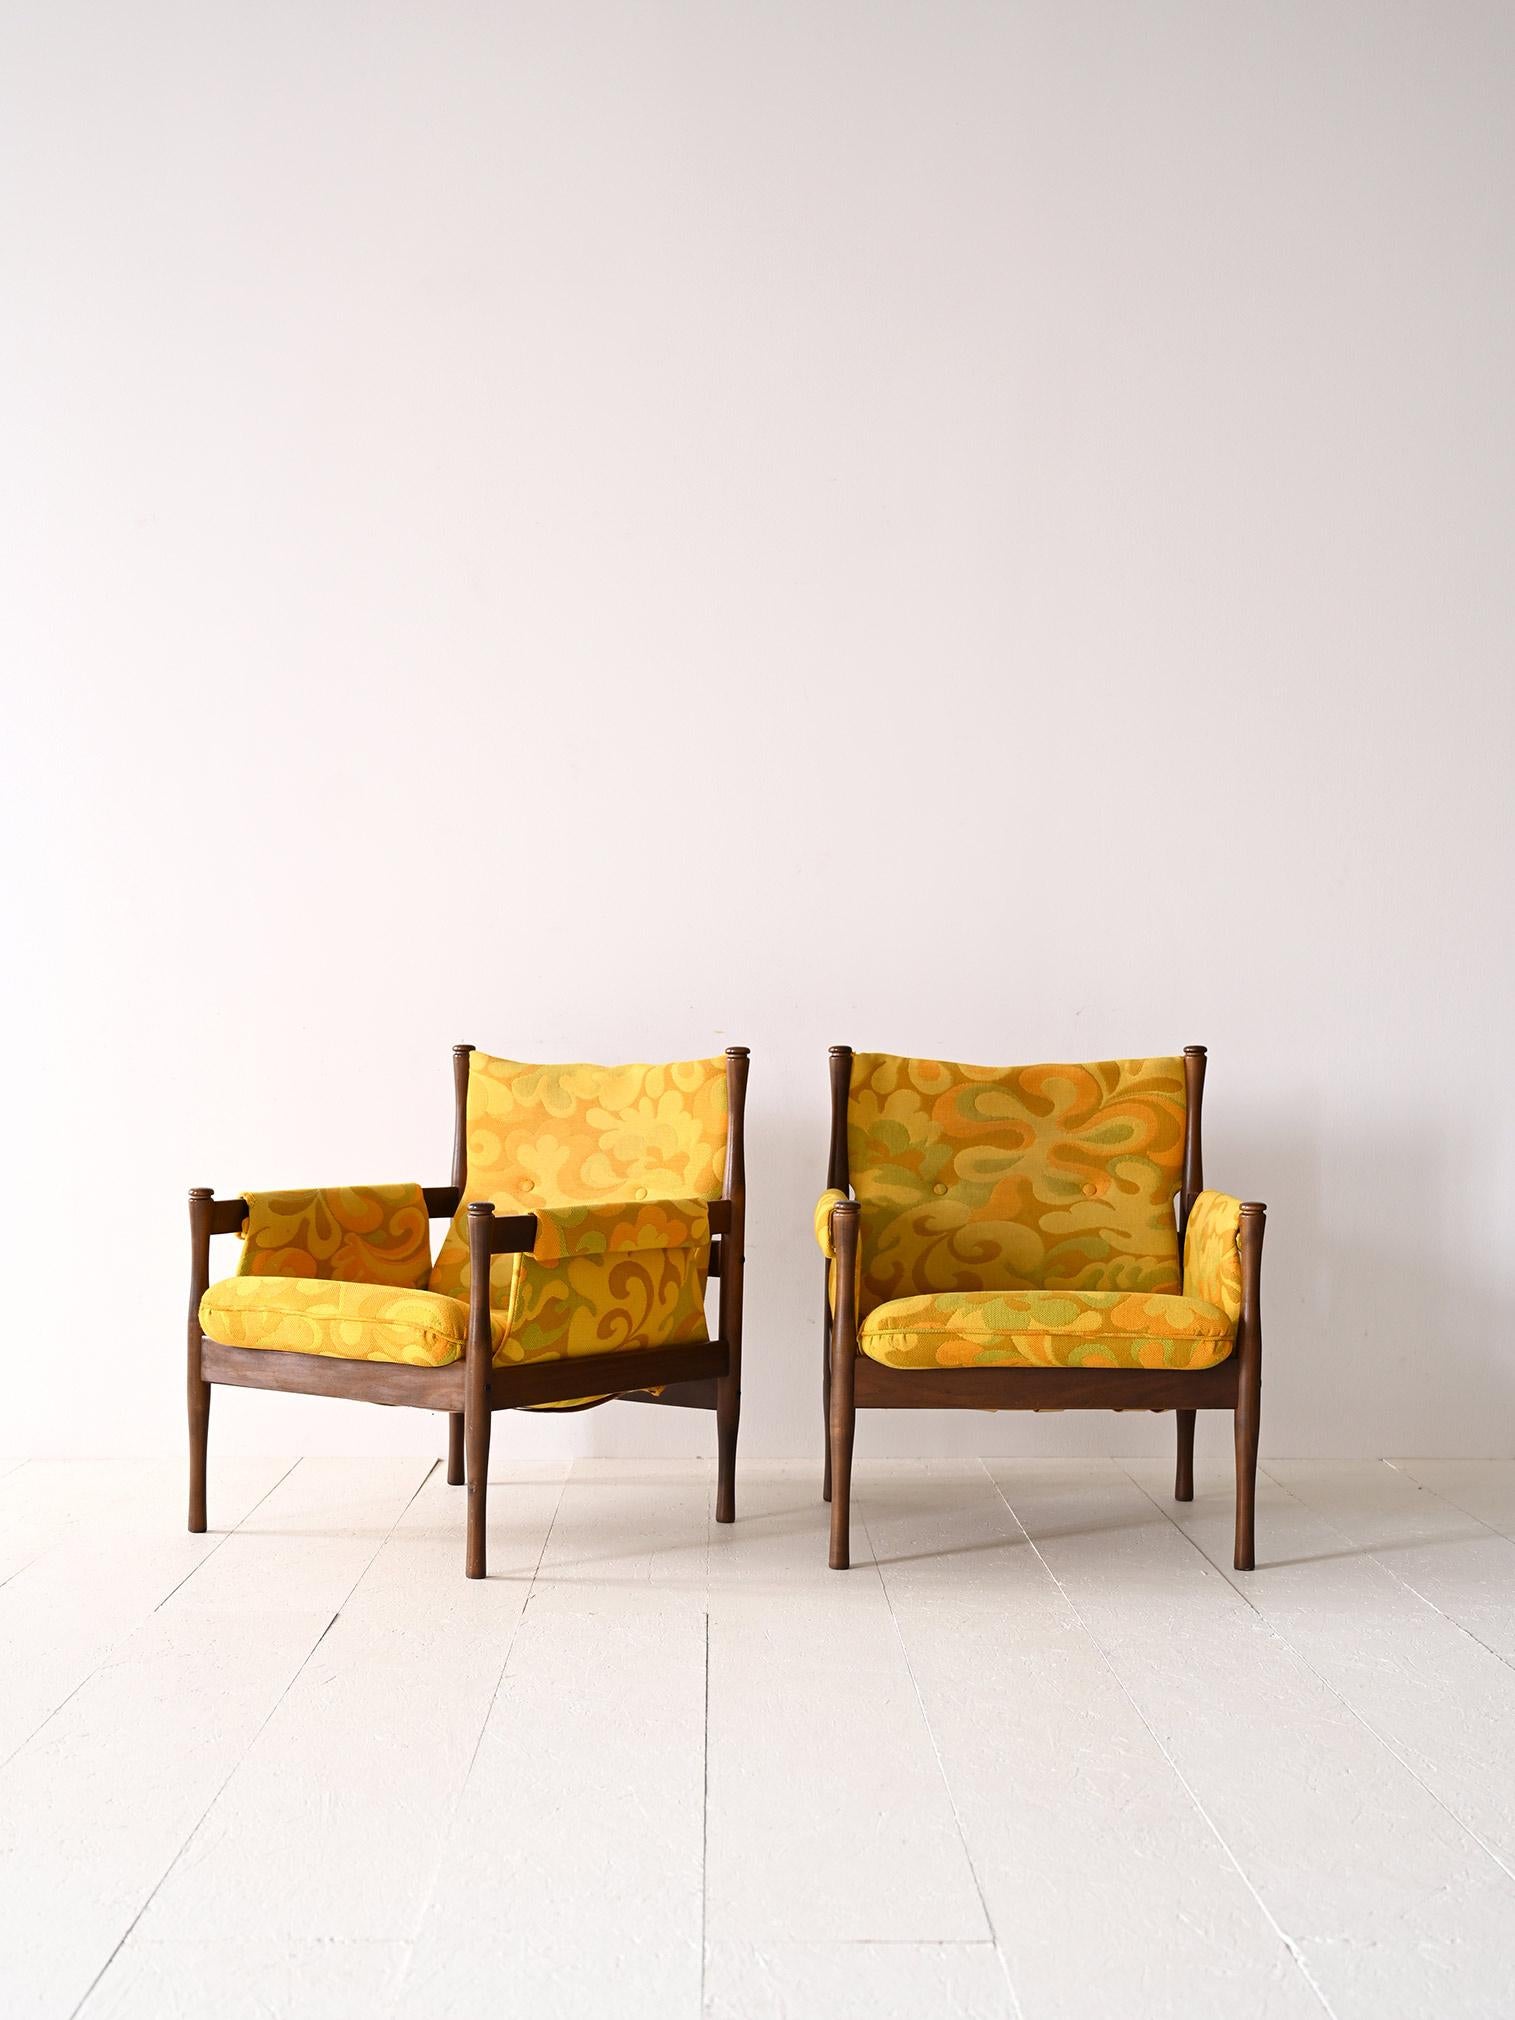 Scandinavian armchairs with wooden frames.

This pair of Swedish modernist armchairs traces mid-century taste and style.
Consisting of a square wooden frame with tapered legs and an upholstered seat and backrest reupholstered with fabric in floral